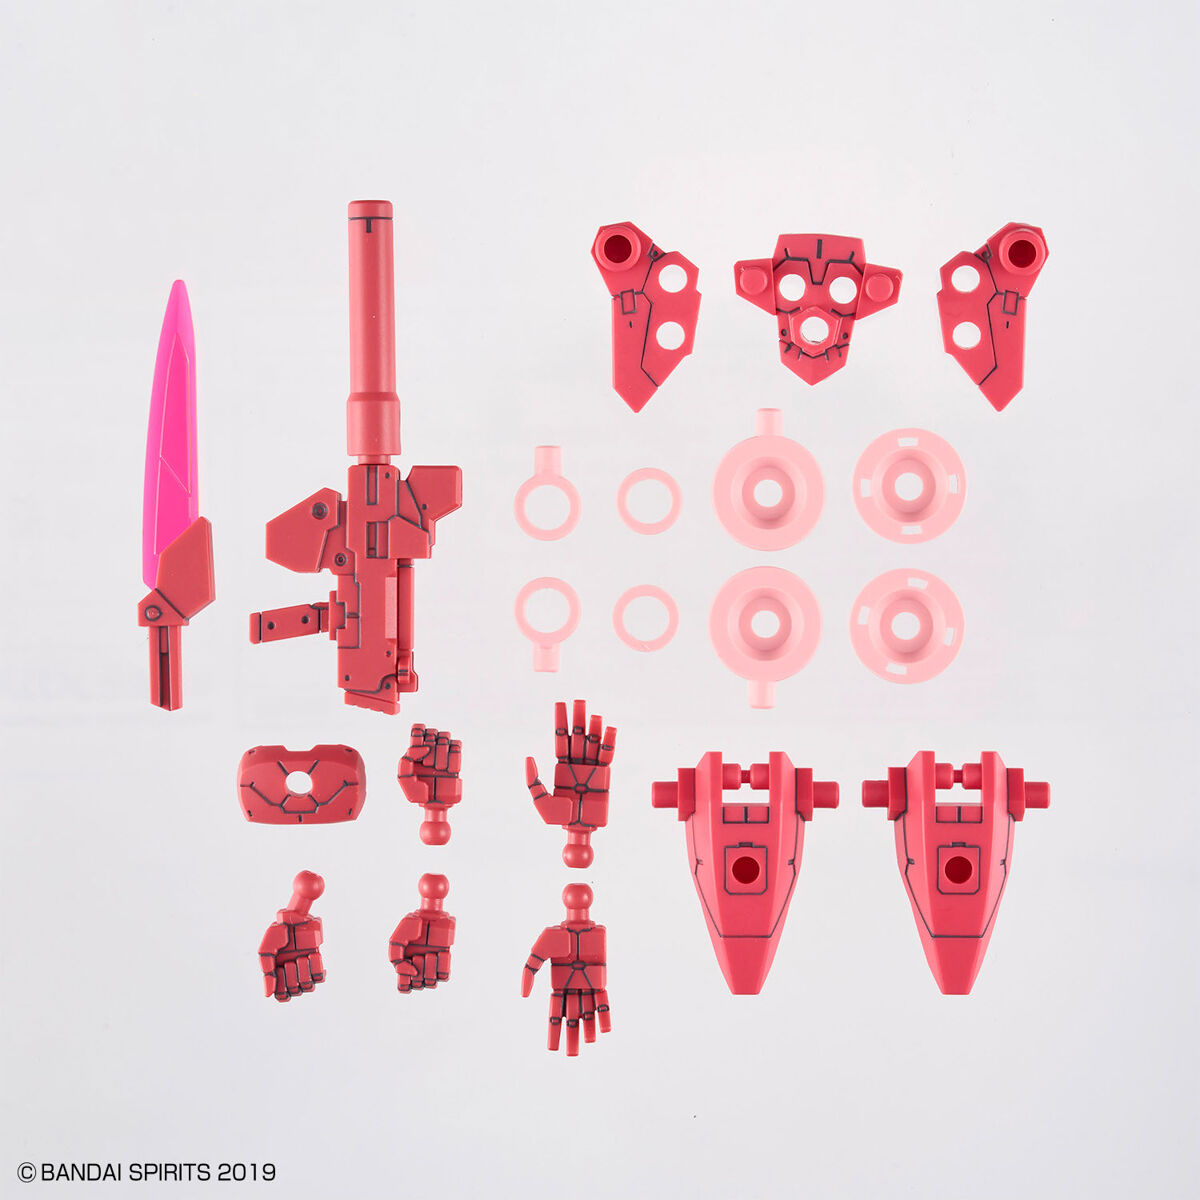 30MM - 1/144 - EXM-H15A - ACERBY (TYPE-A) (REPEAT) **PRE-ORDER**